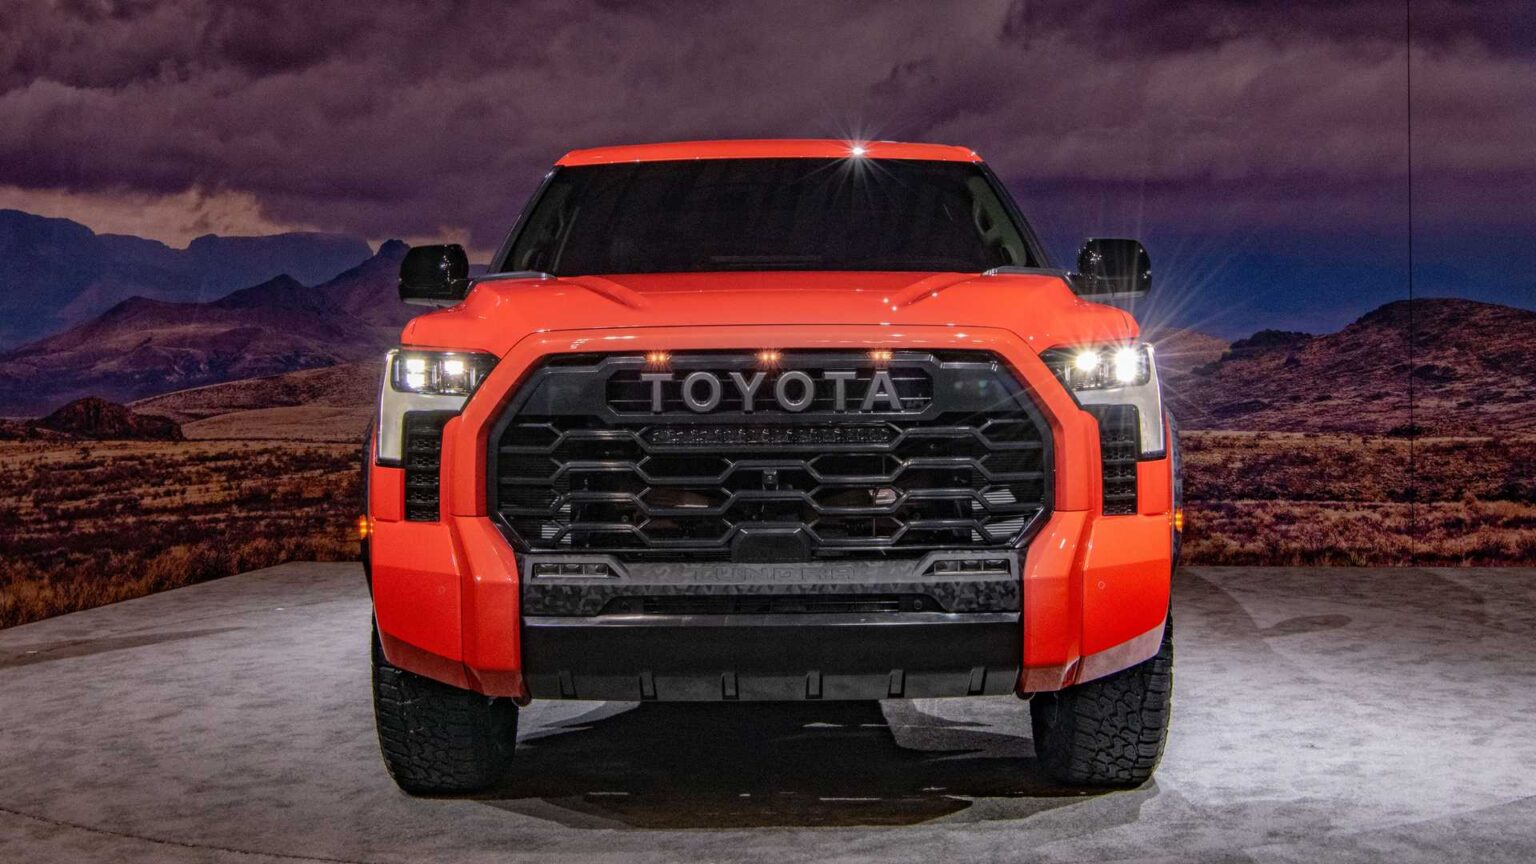 2022-toyota-tundra-trd-pro-exterior-front-view-1-1536x864.jpg